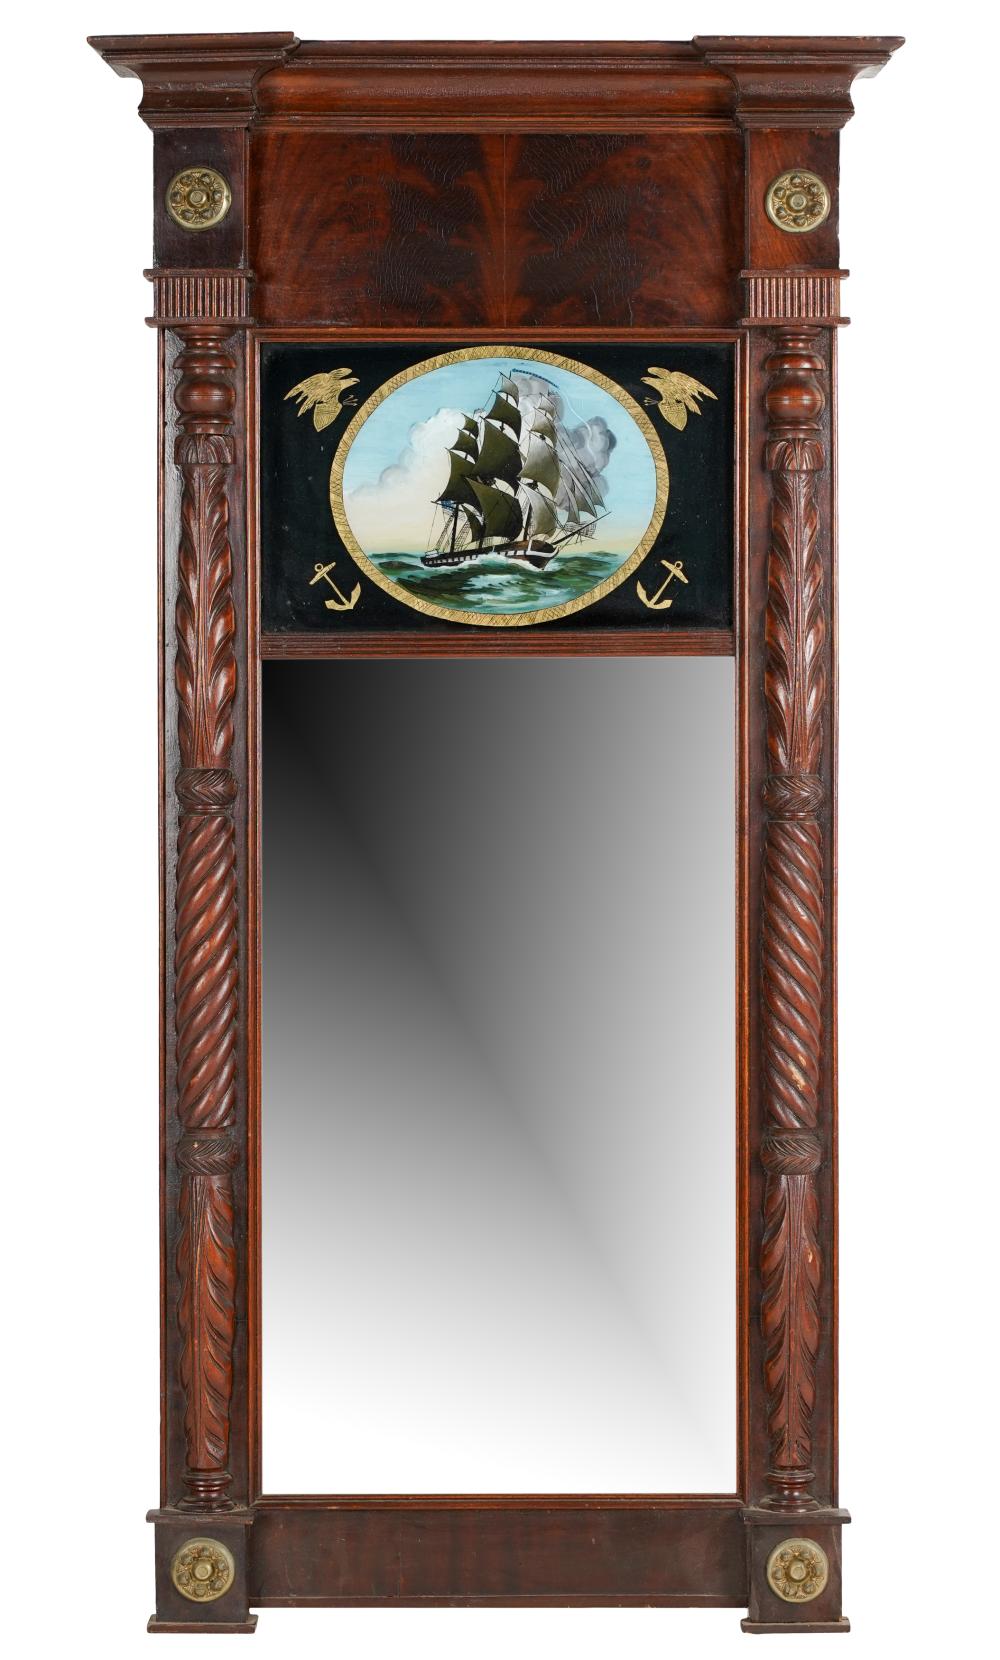 MAHOGANY & PAINTED GLASS PIER MIRRORdepicting